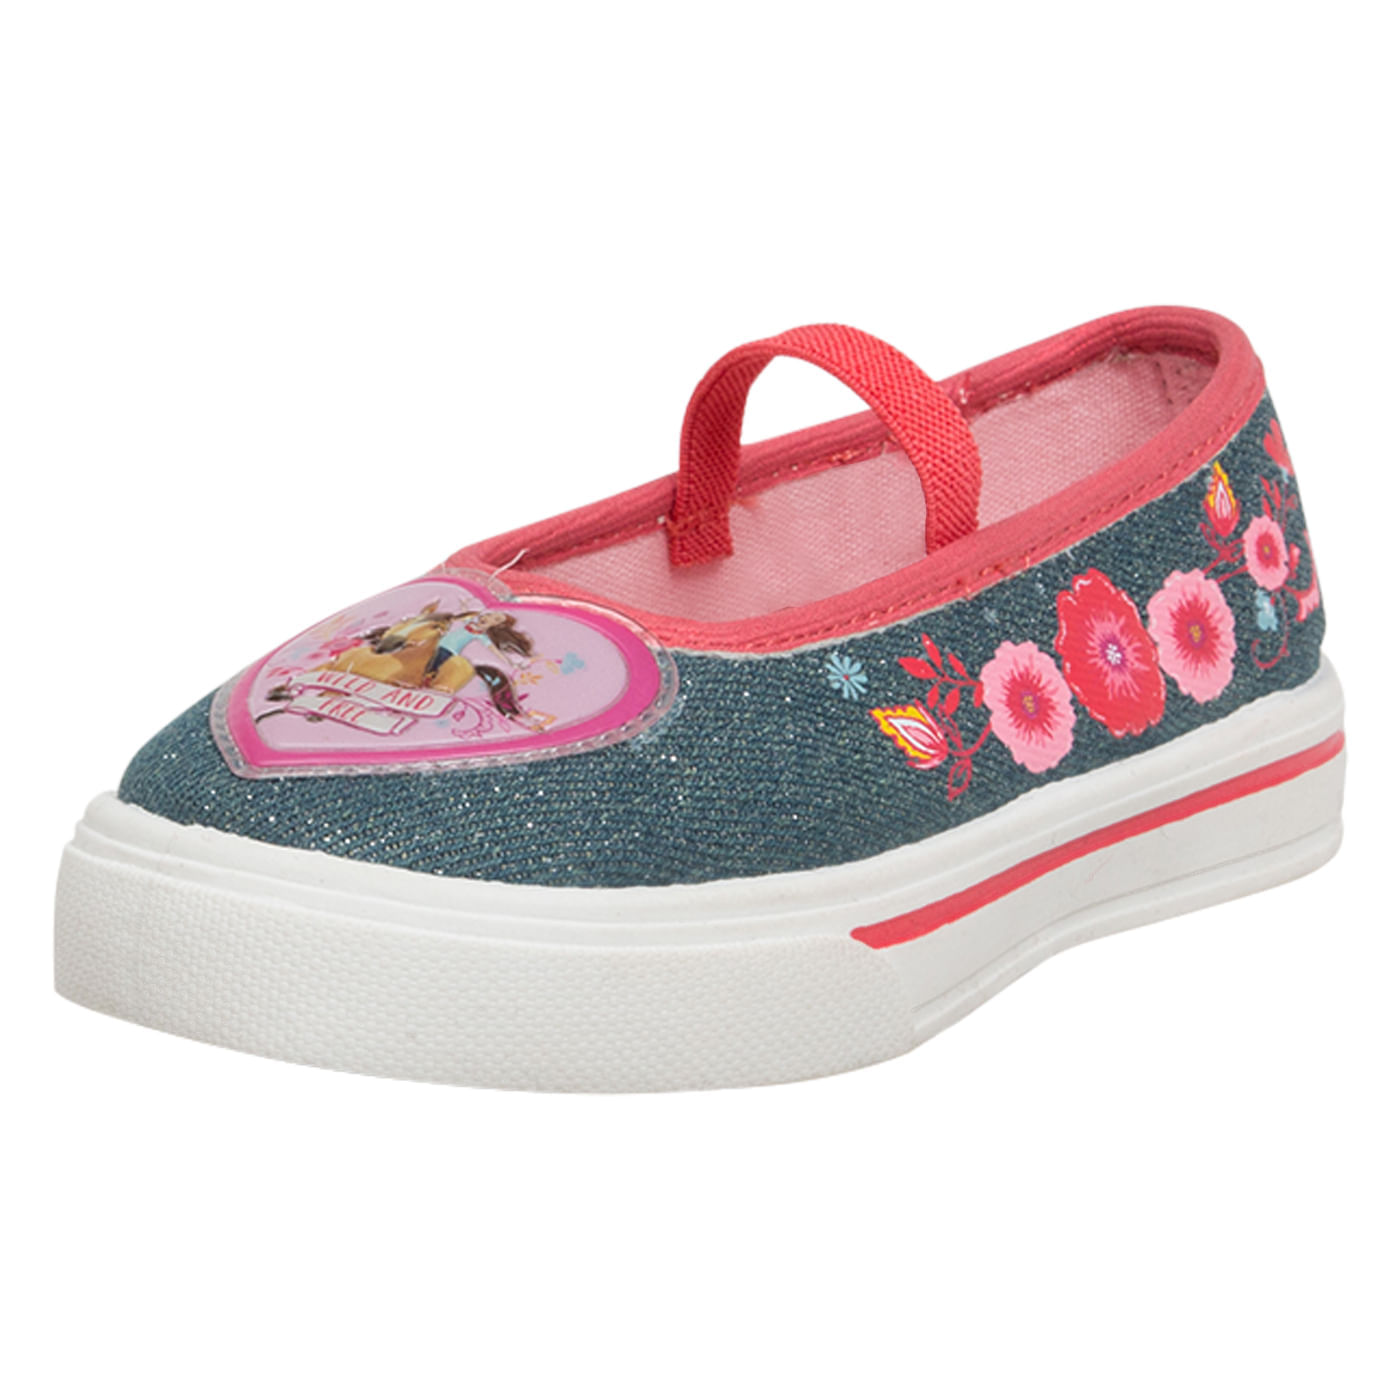 Gymboree canvas shoes NWT UPICK girls 2 4 big girl mary jane sneakers flower red 